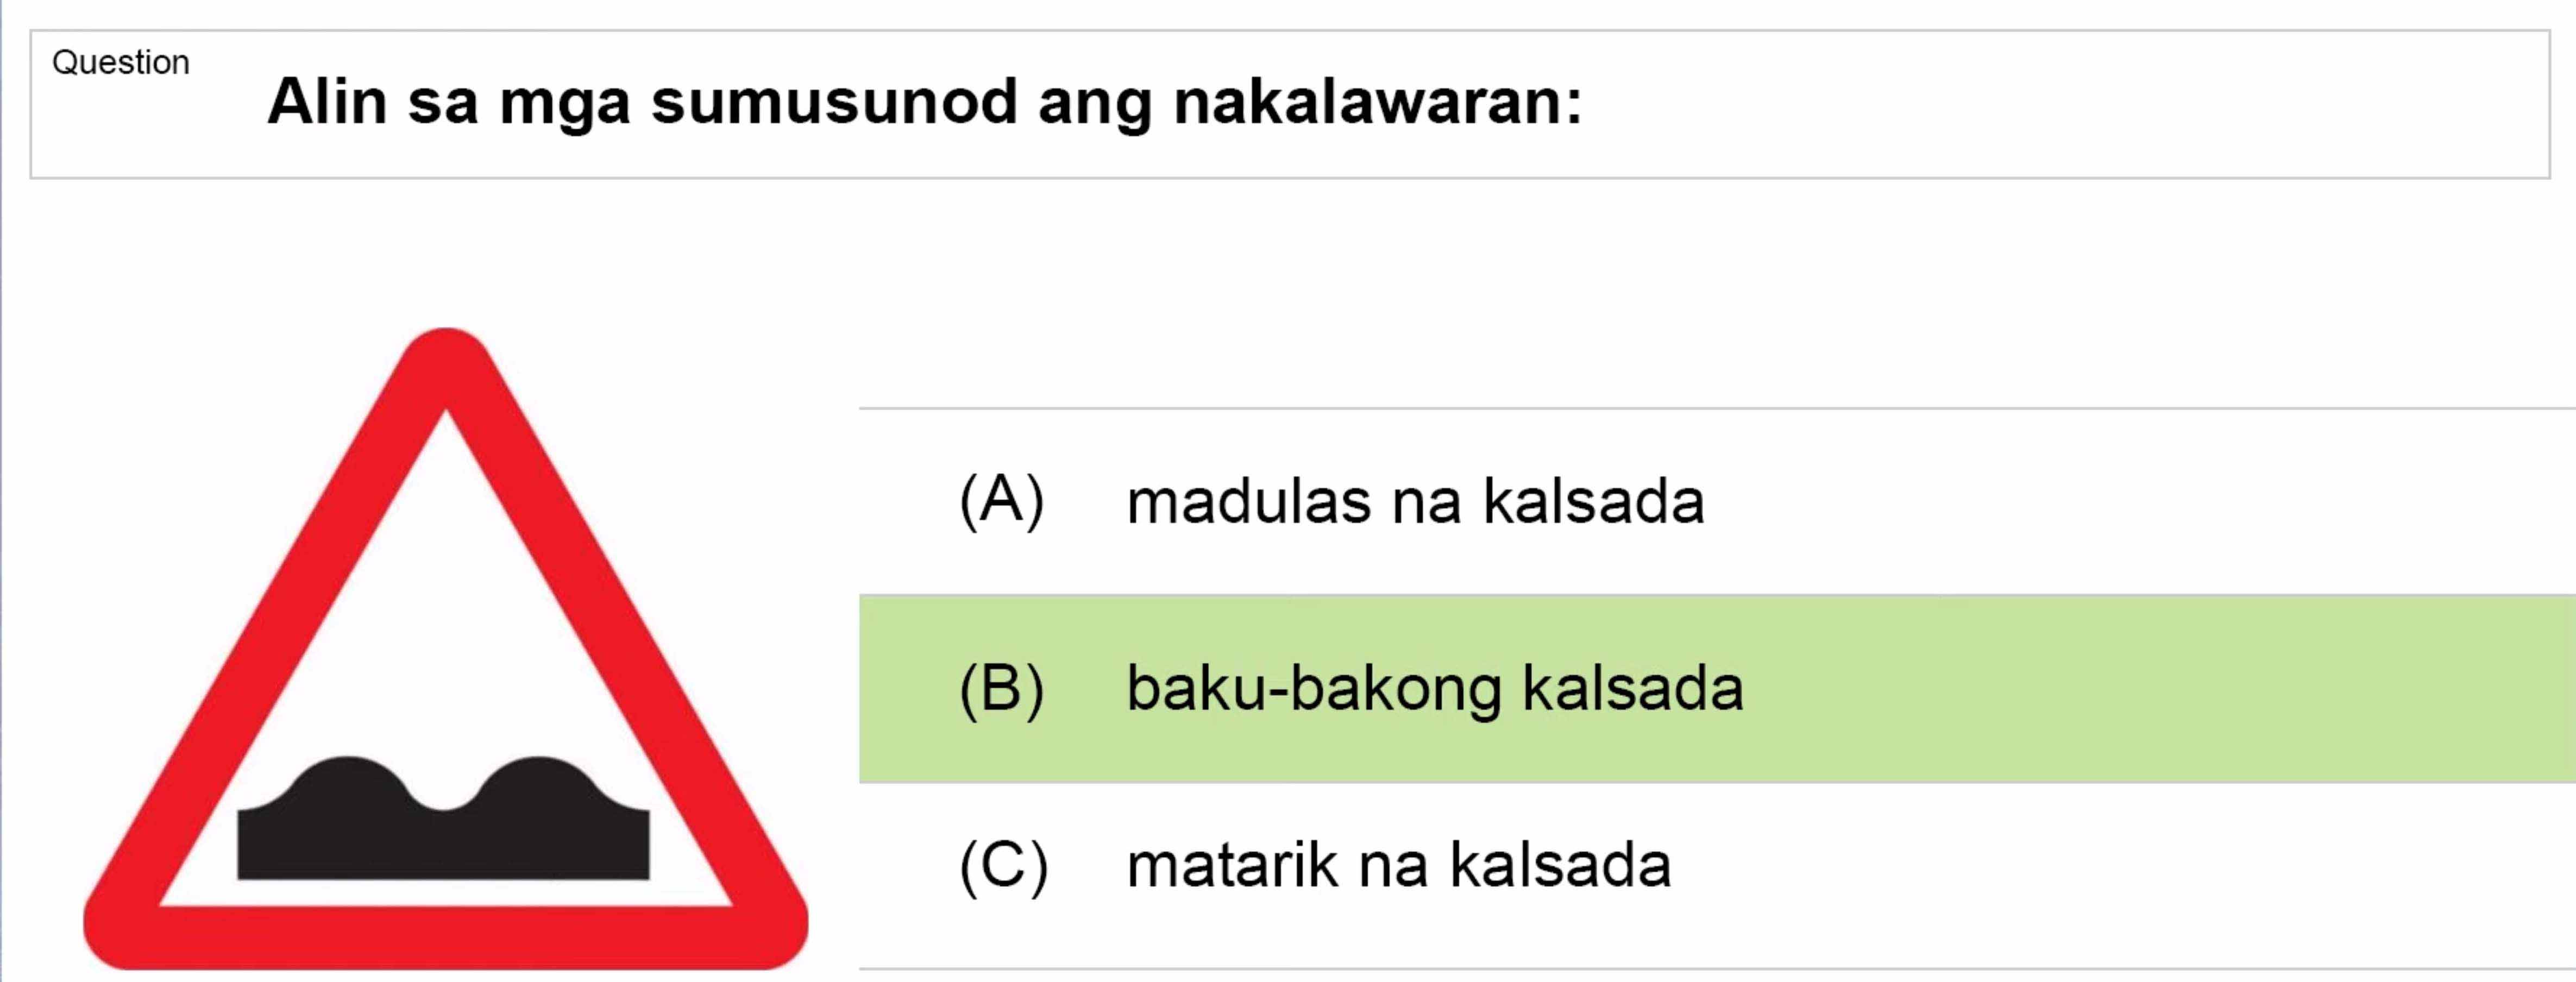 LTO Tagalog non professional exam reviewer motorcycle 1 (49)